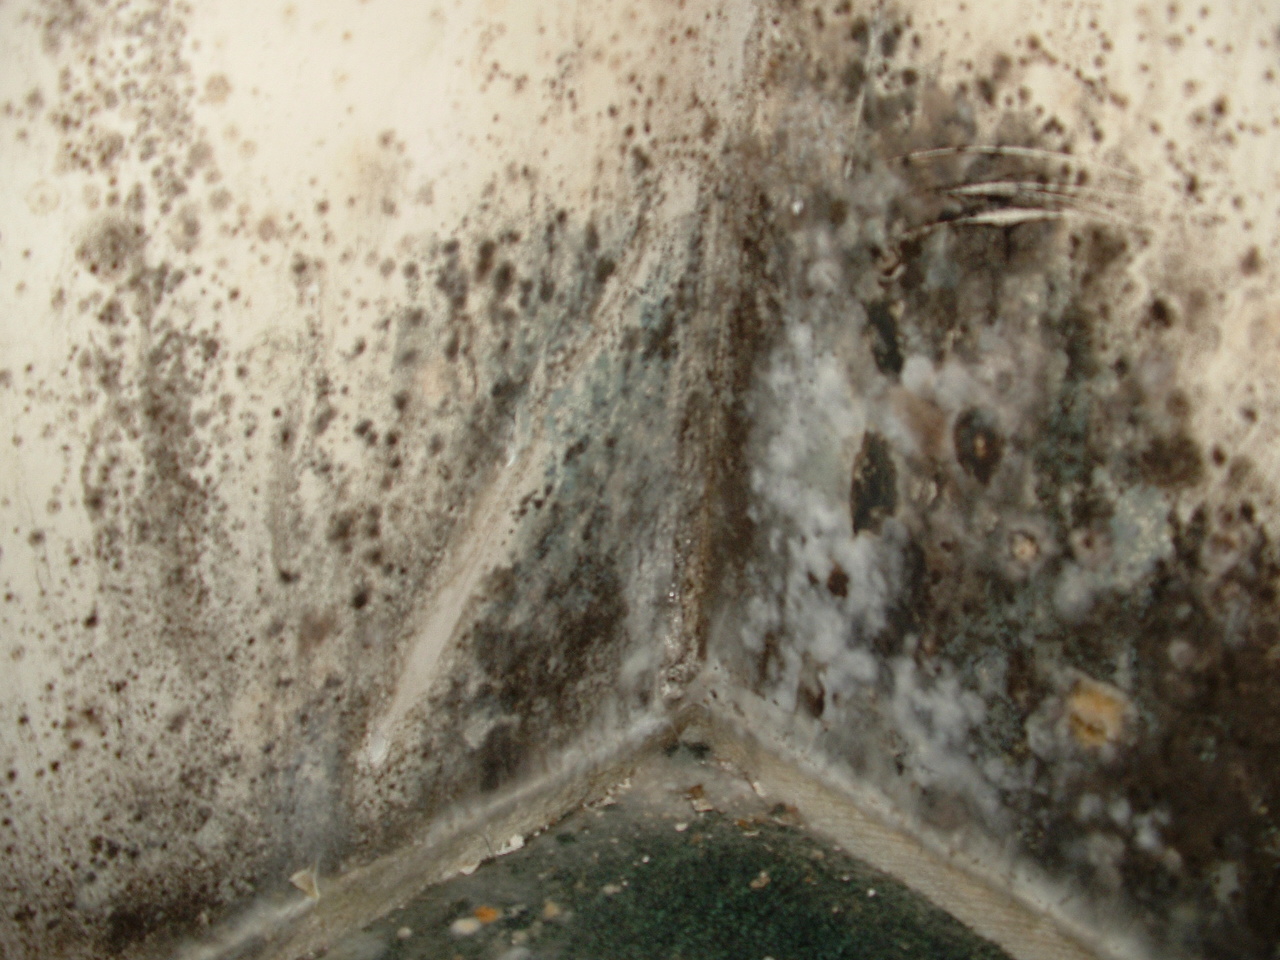 How do you clean up mold in your house?